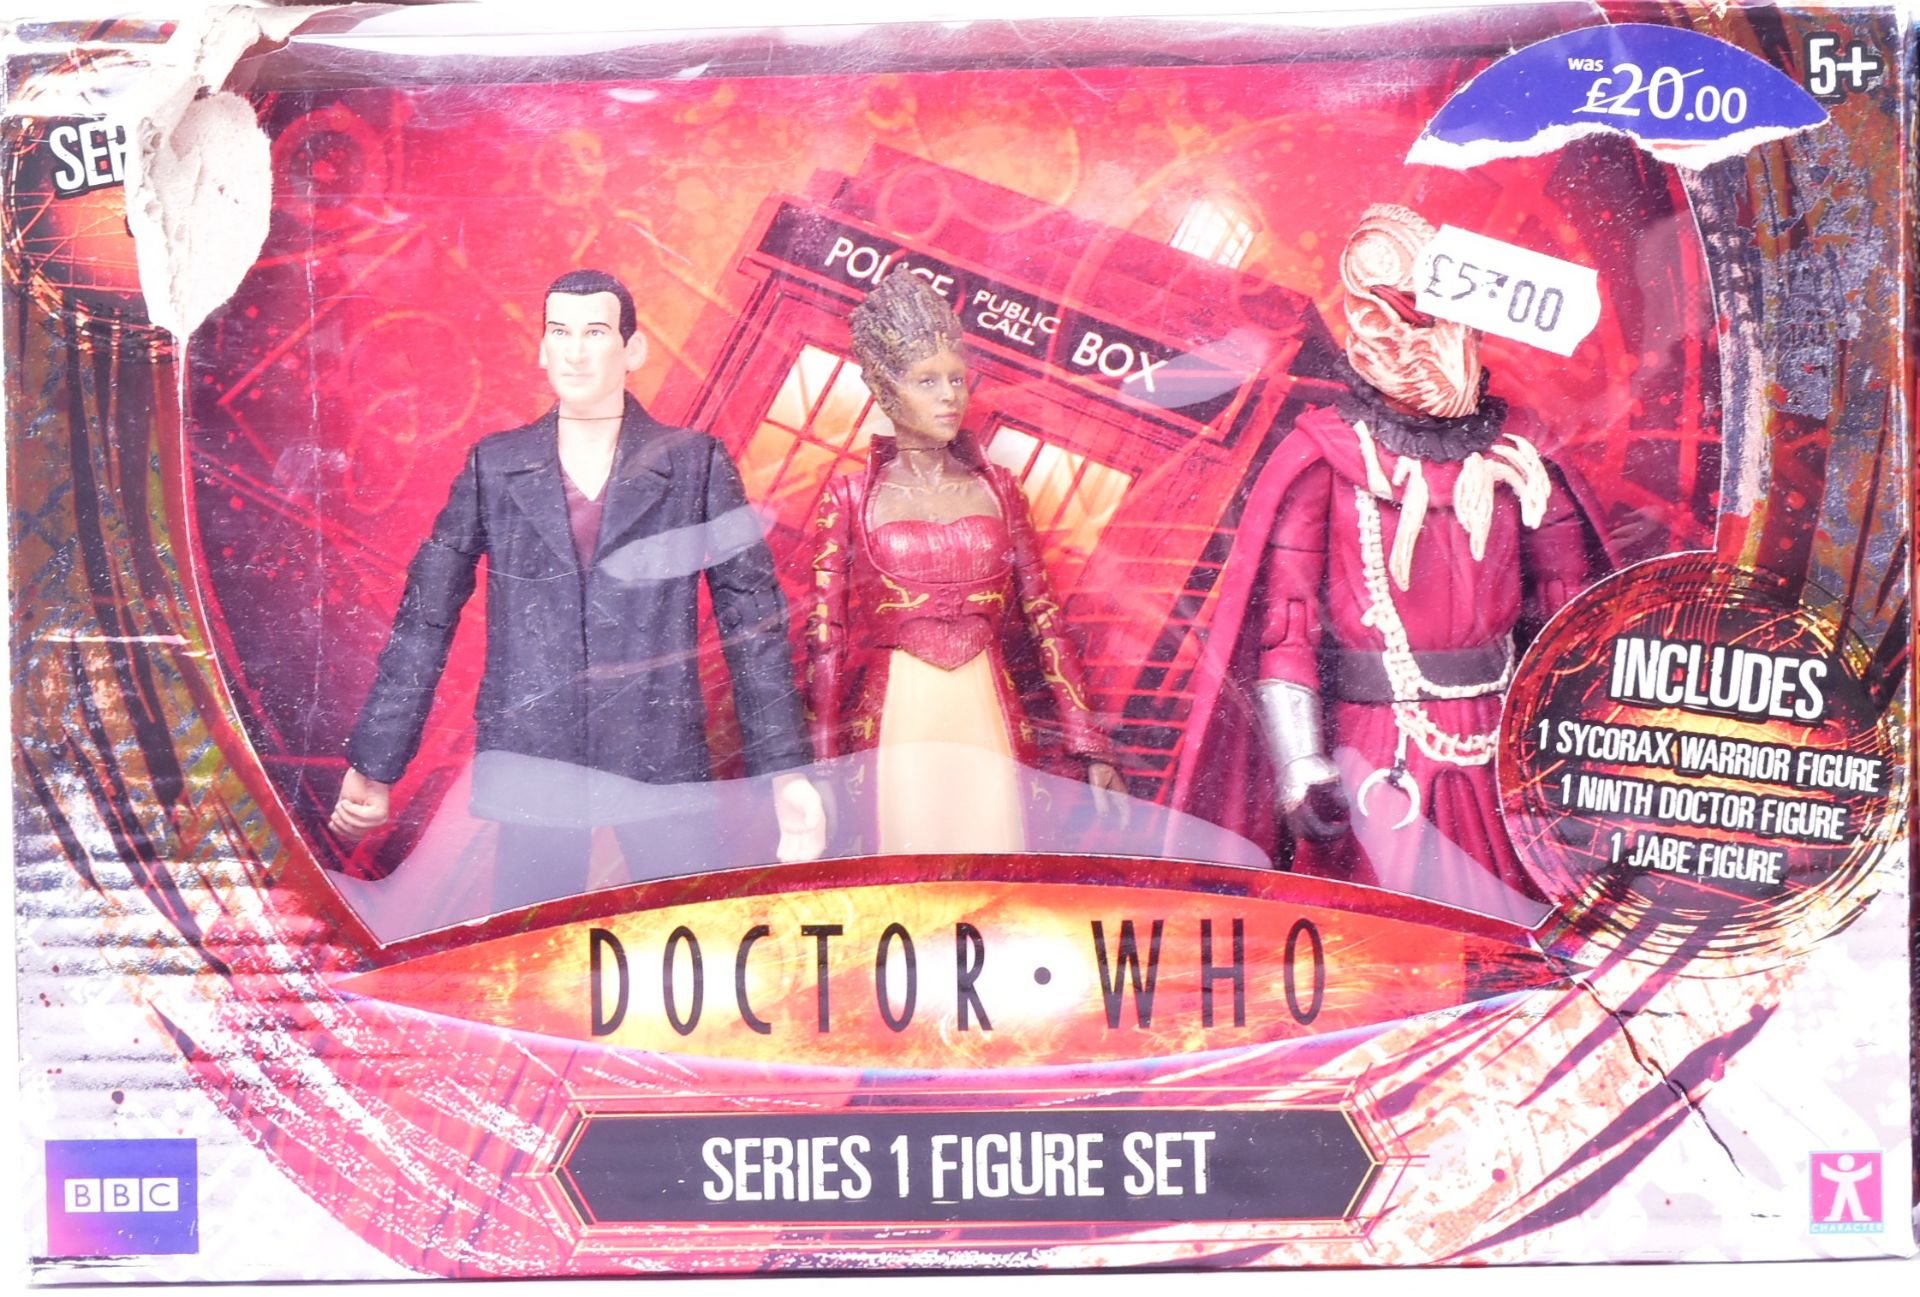 DOCTOR WHO - CHARACTER OPTIONS - 'SERIES' FIGURE SETS - Image 2 of 4